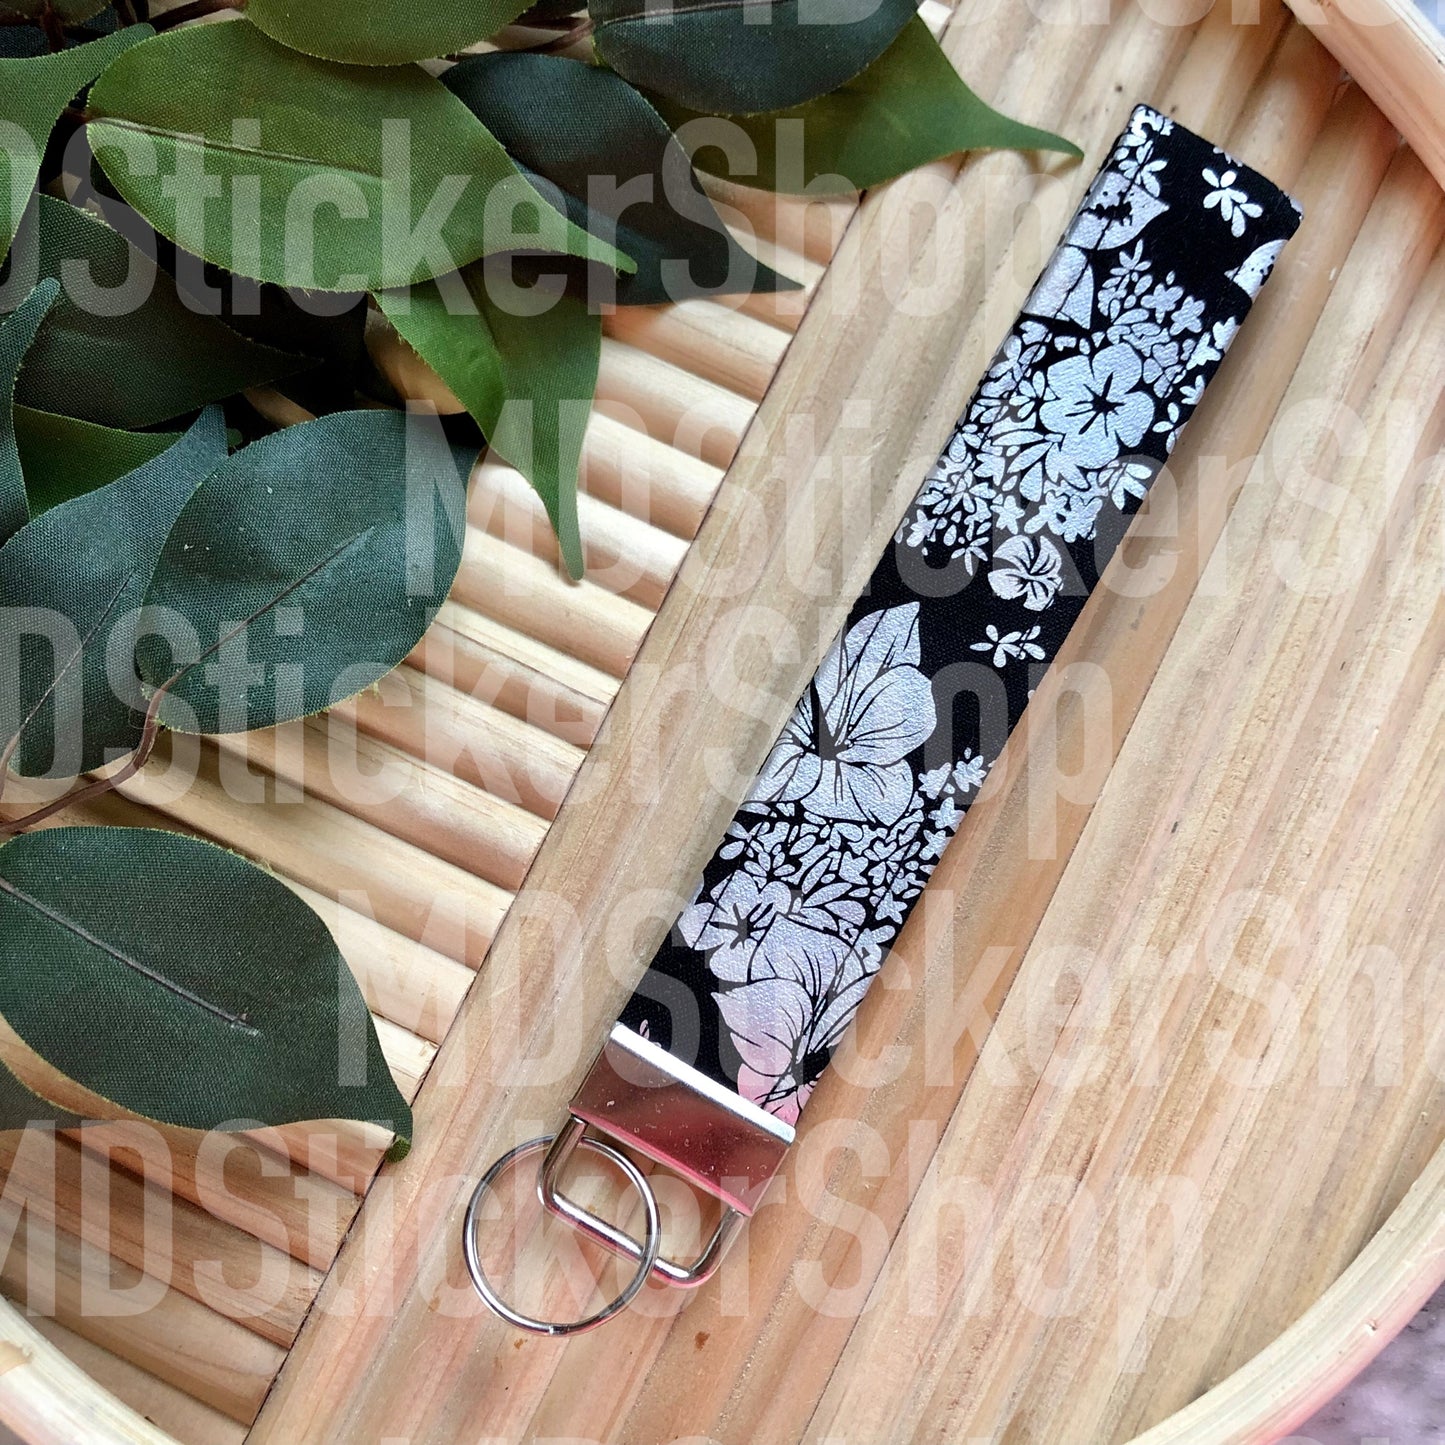 Black and Silver Metallic Floral Print Fabric Keychain